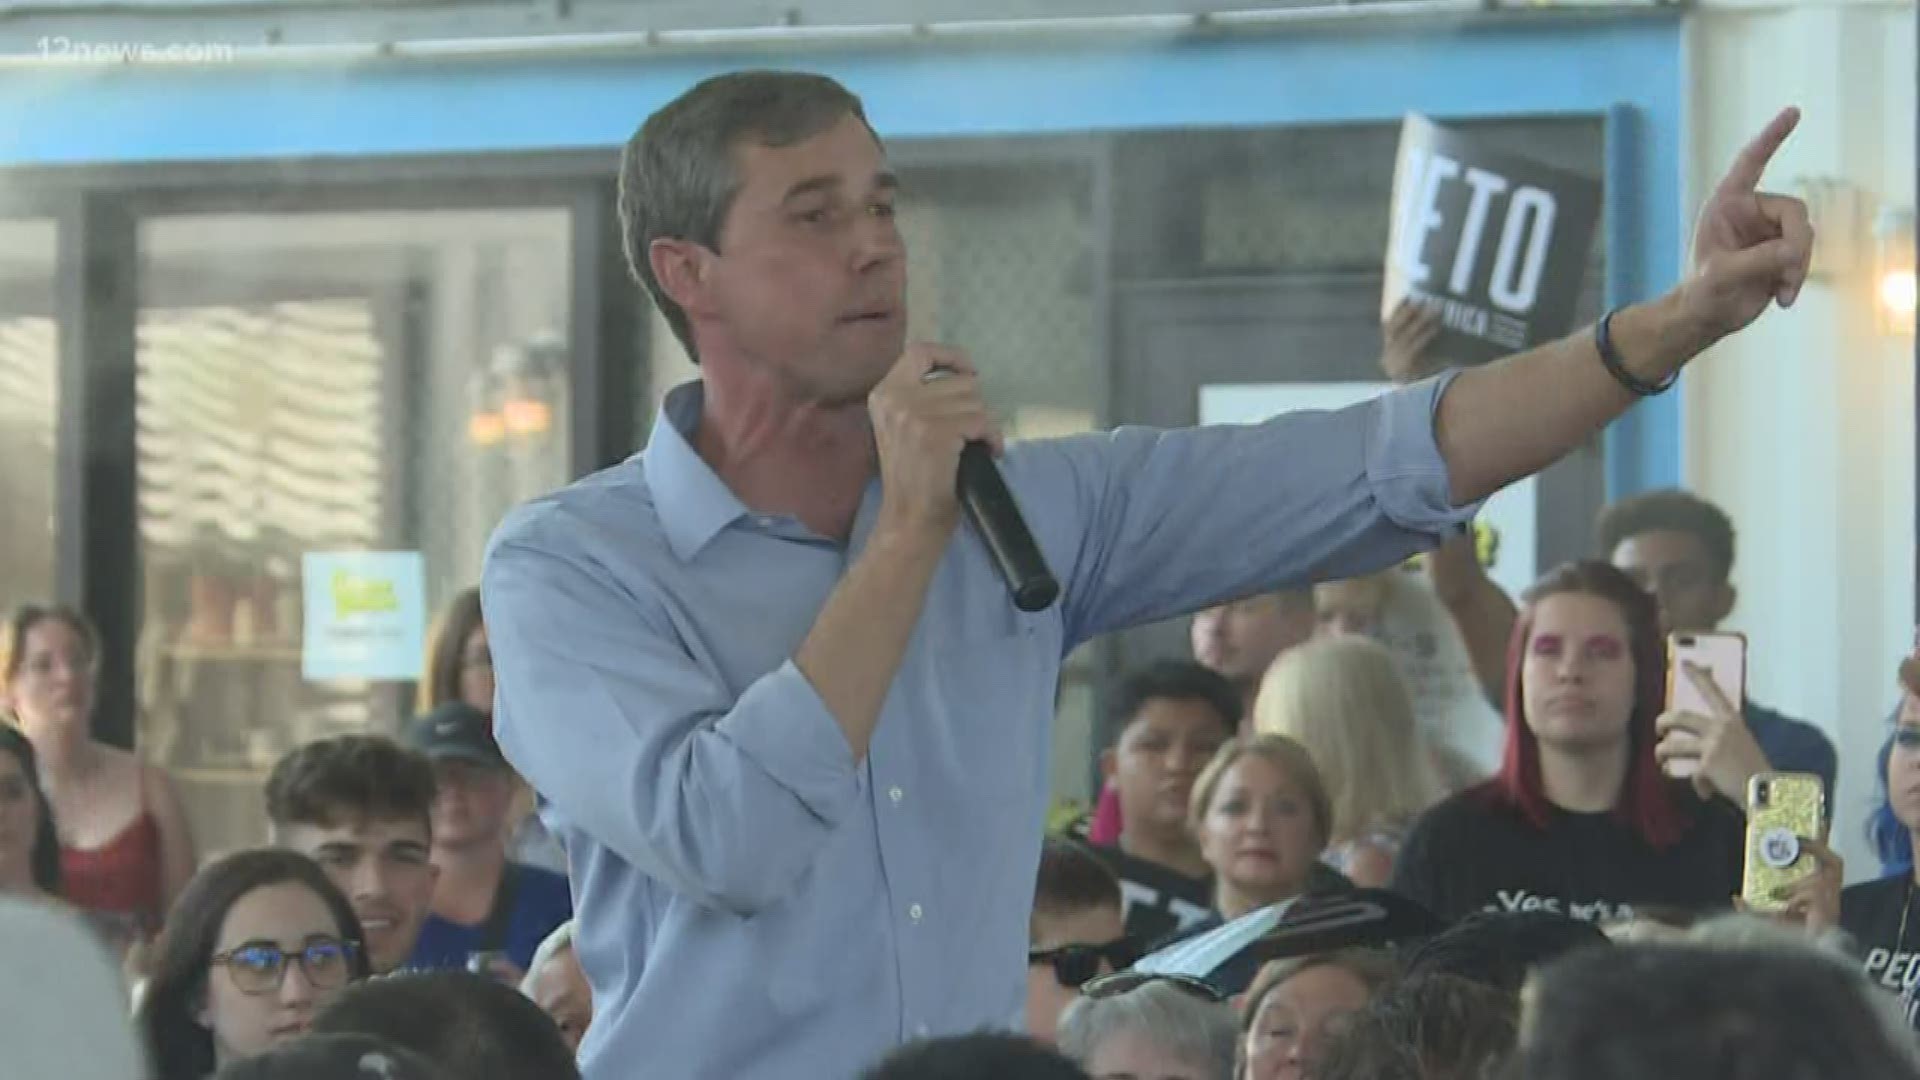 Democratic presidential candidate Beto O'Rourke held a rally on Sunday in downtown Phoenix. Team 12's Matt Yurus has the story.